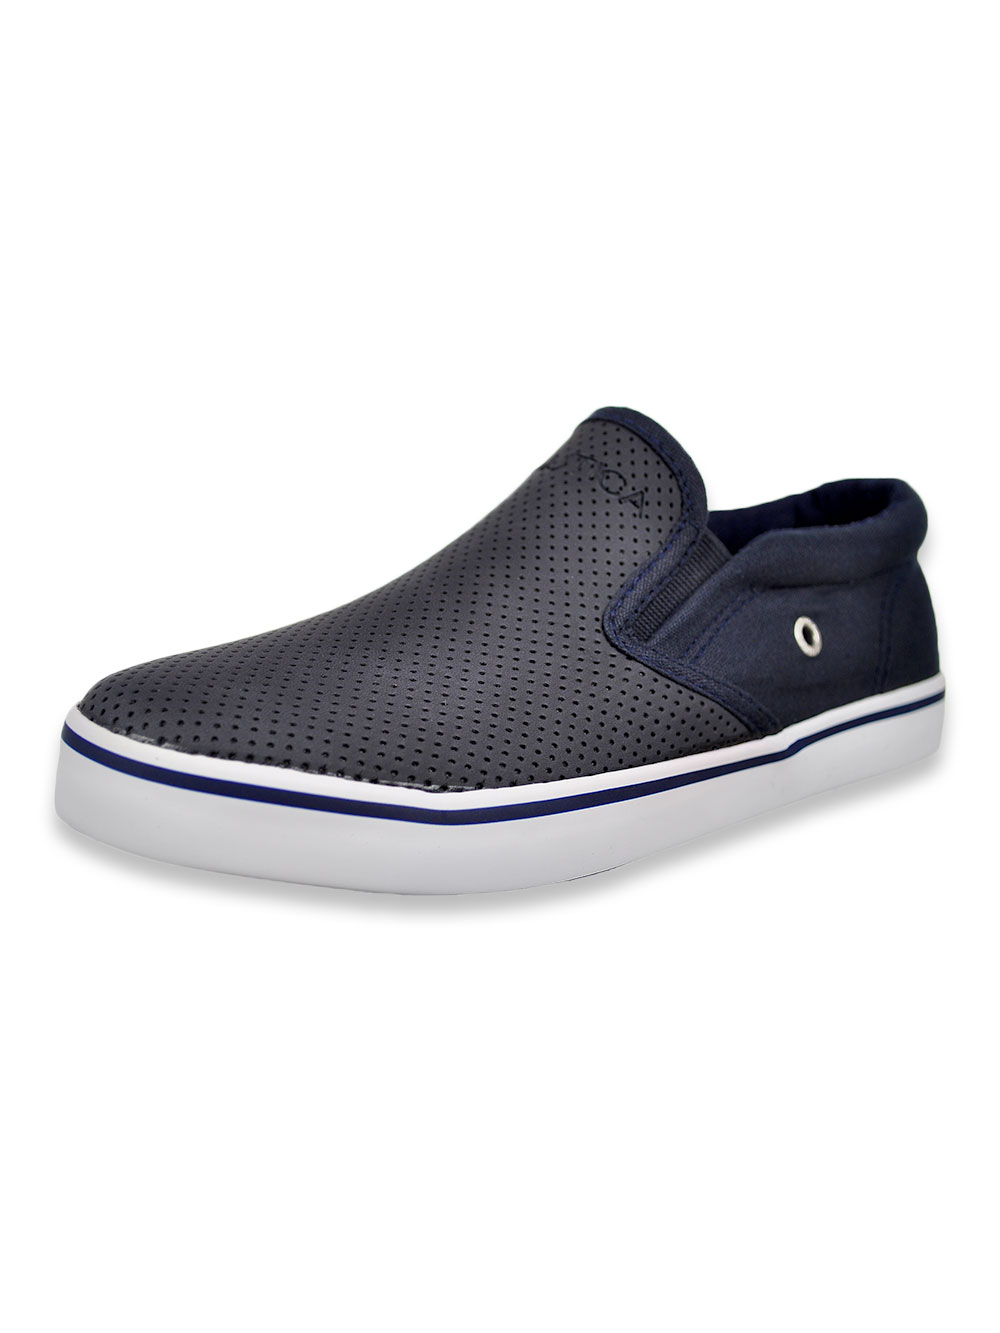 gray perforated slip on sneakers